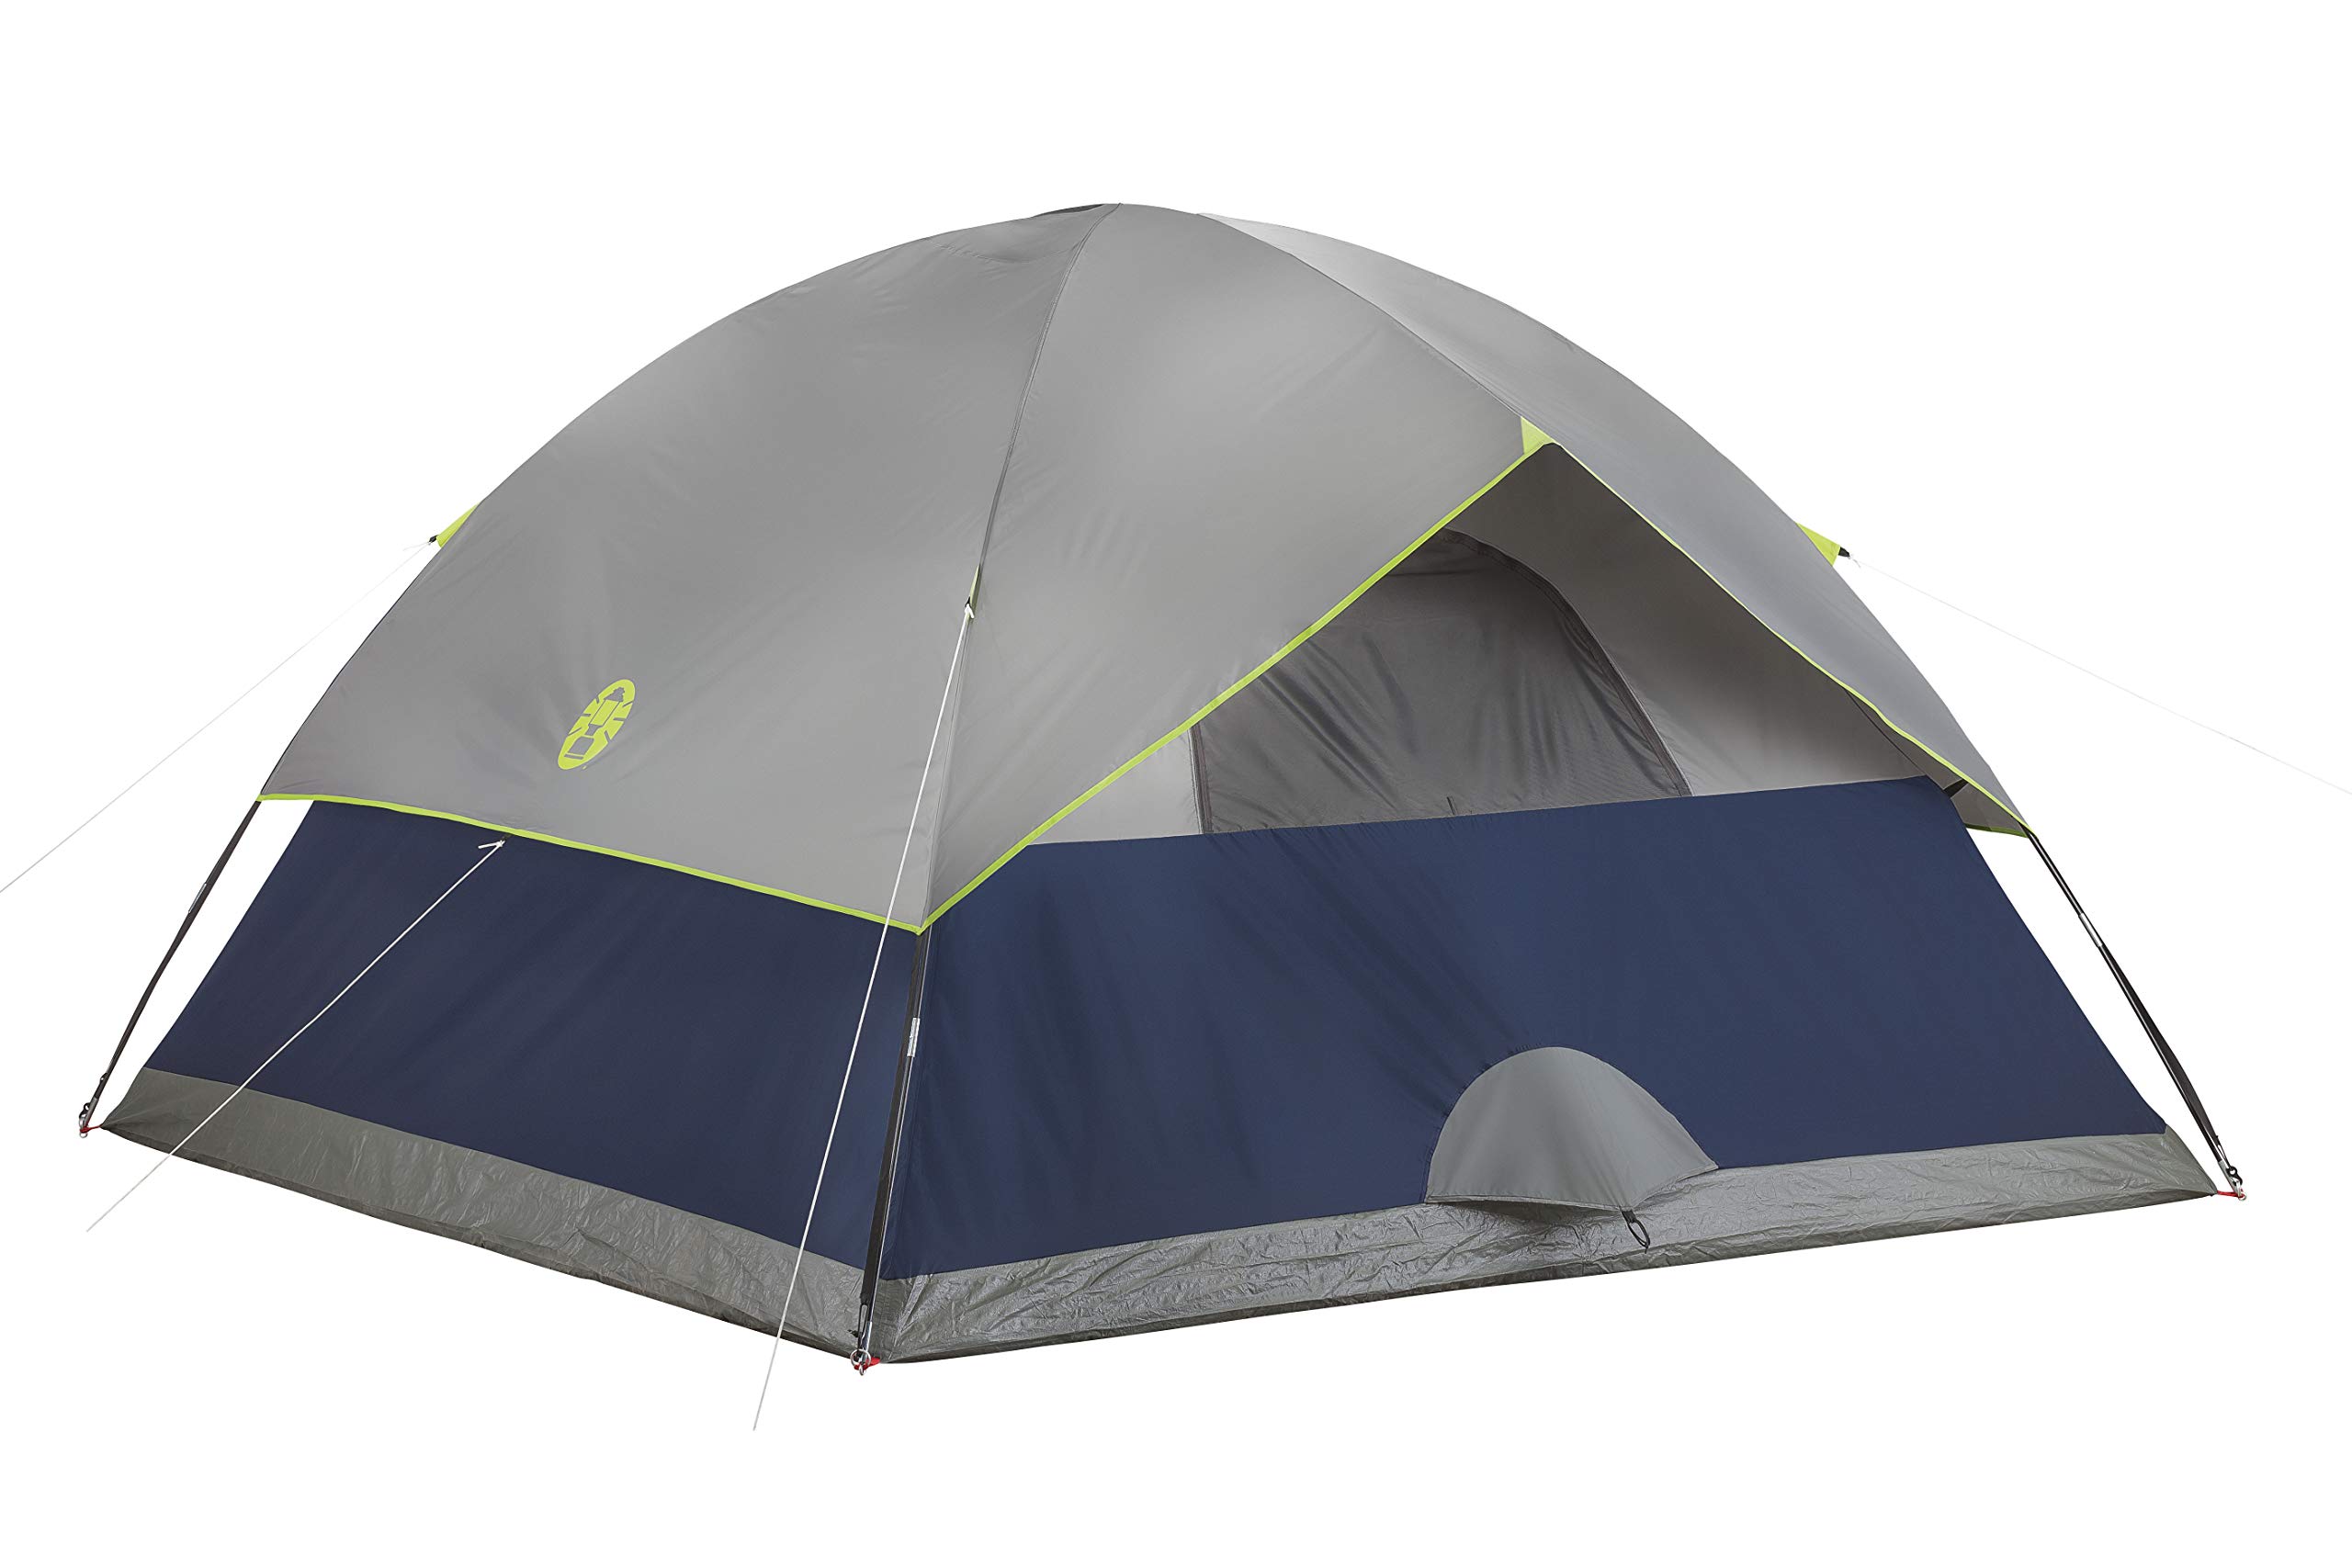 Coleman Sundome Camping Tent, 2/3/4/6 Person Dome Tent with Easy Setup, Included Rainfly and WeatherTec Floor to Block Out Water, 2 Windows and 1 Ground Vent for Air Flow with Charging E-Port Flap